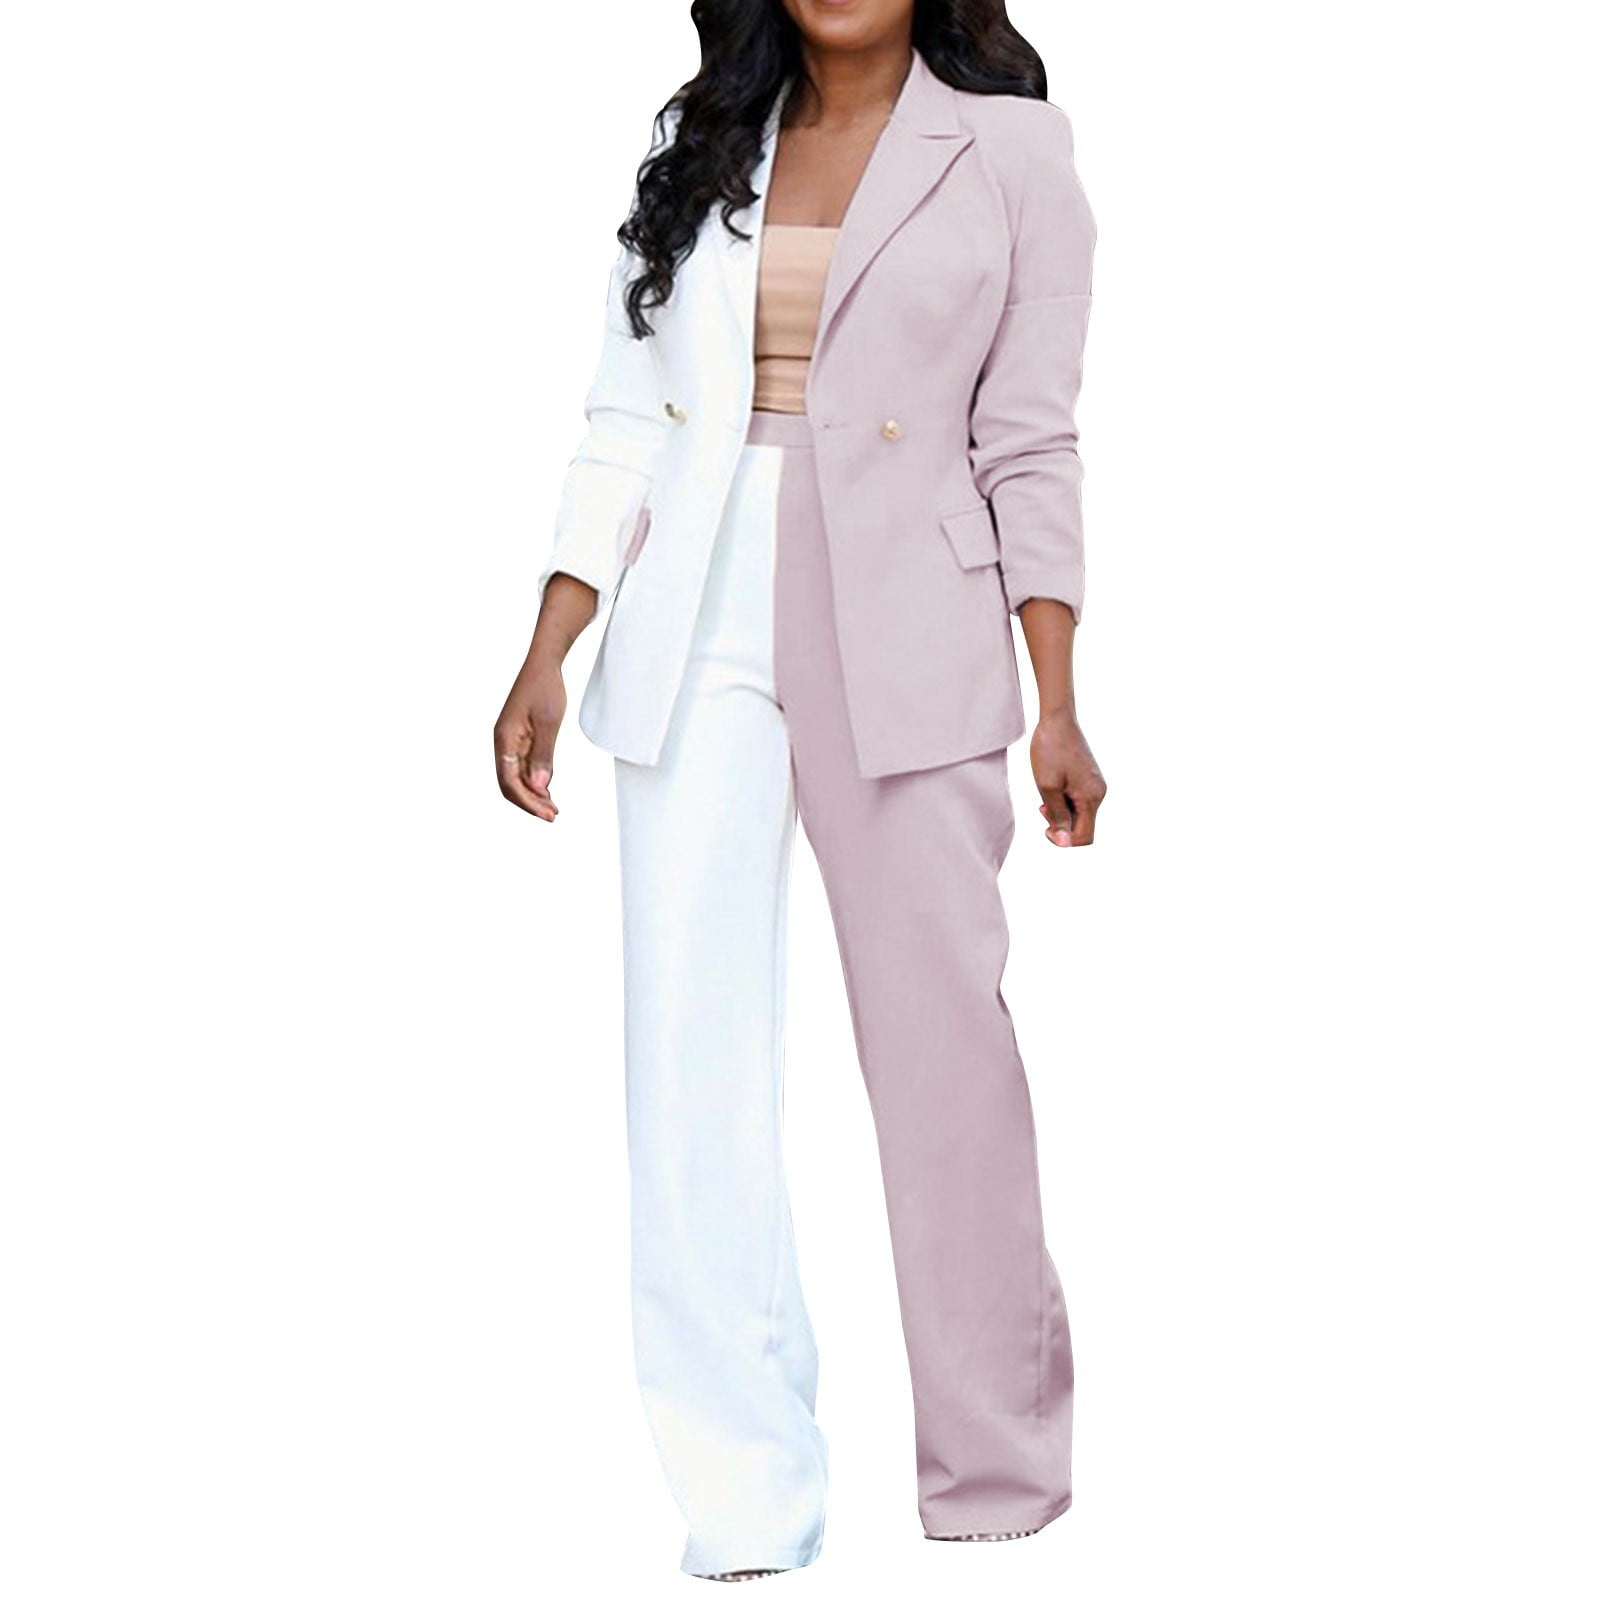 NKOOGH Dressy Pant Suits for A Wedding Petite Size Two Piece for